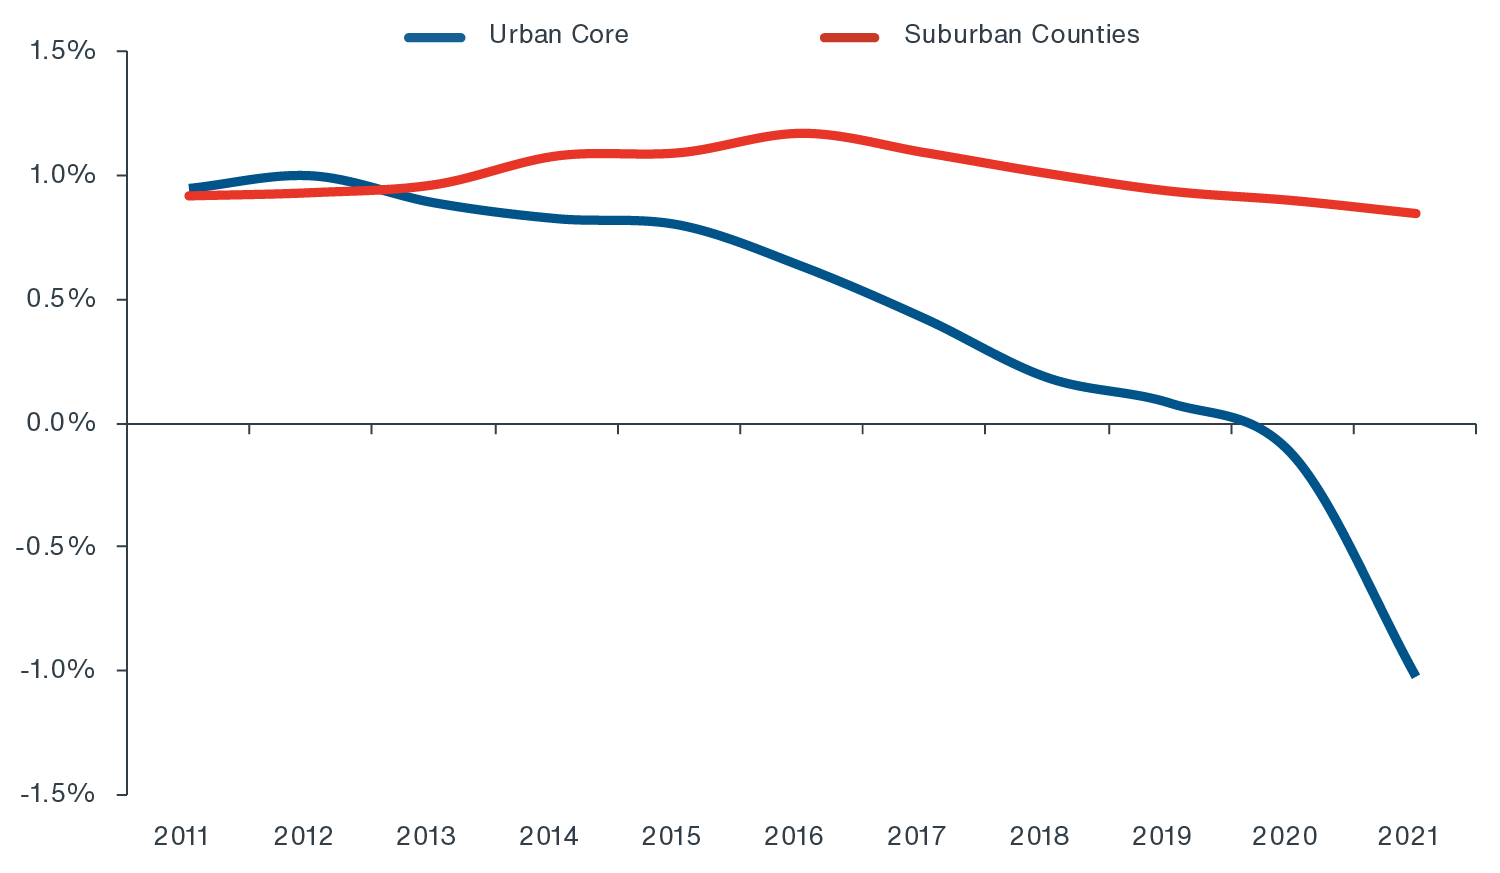 Chart showing declining annual population growth in urban core cities, but steady 1% growth in suburban counties (2010-2021)